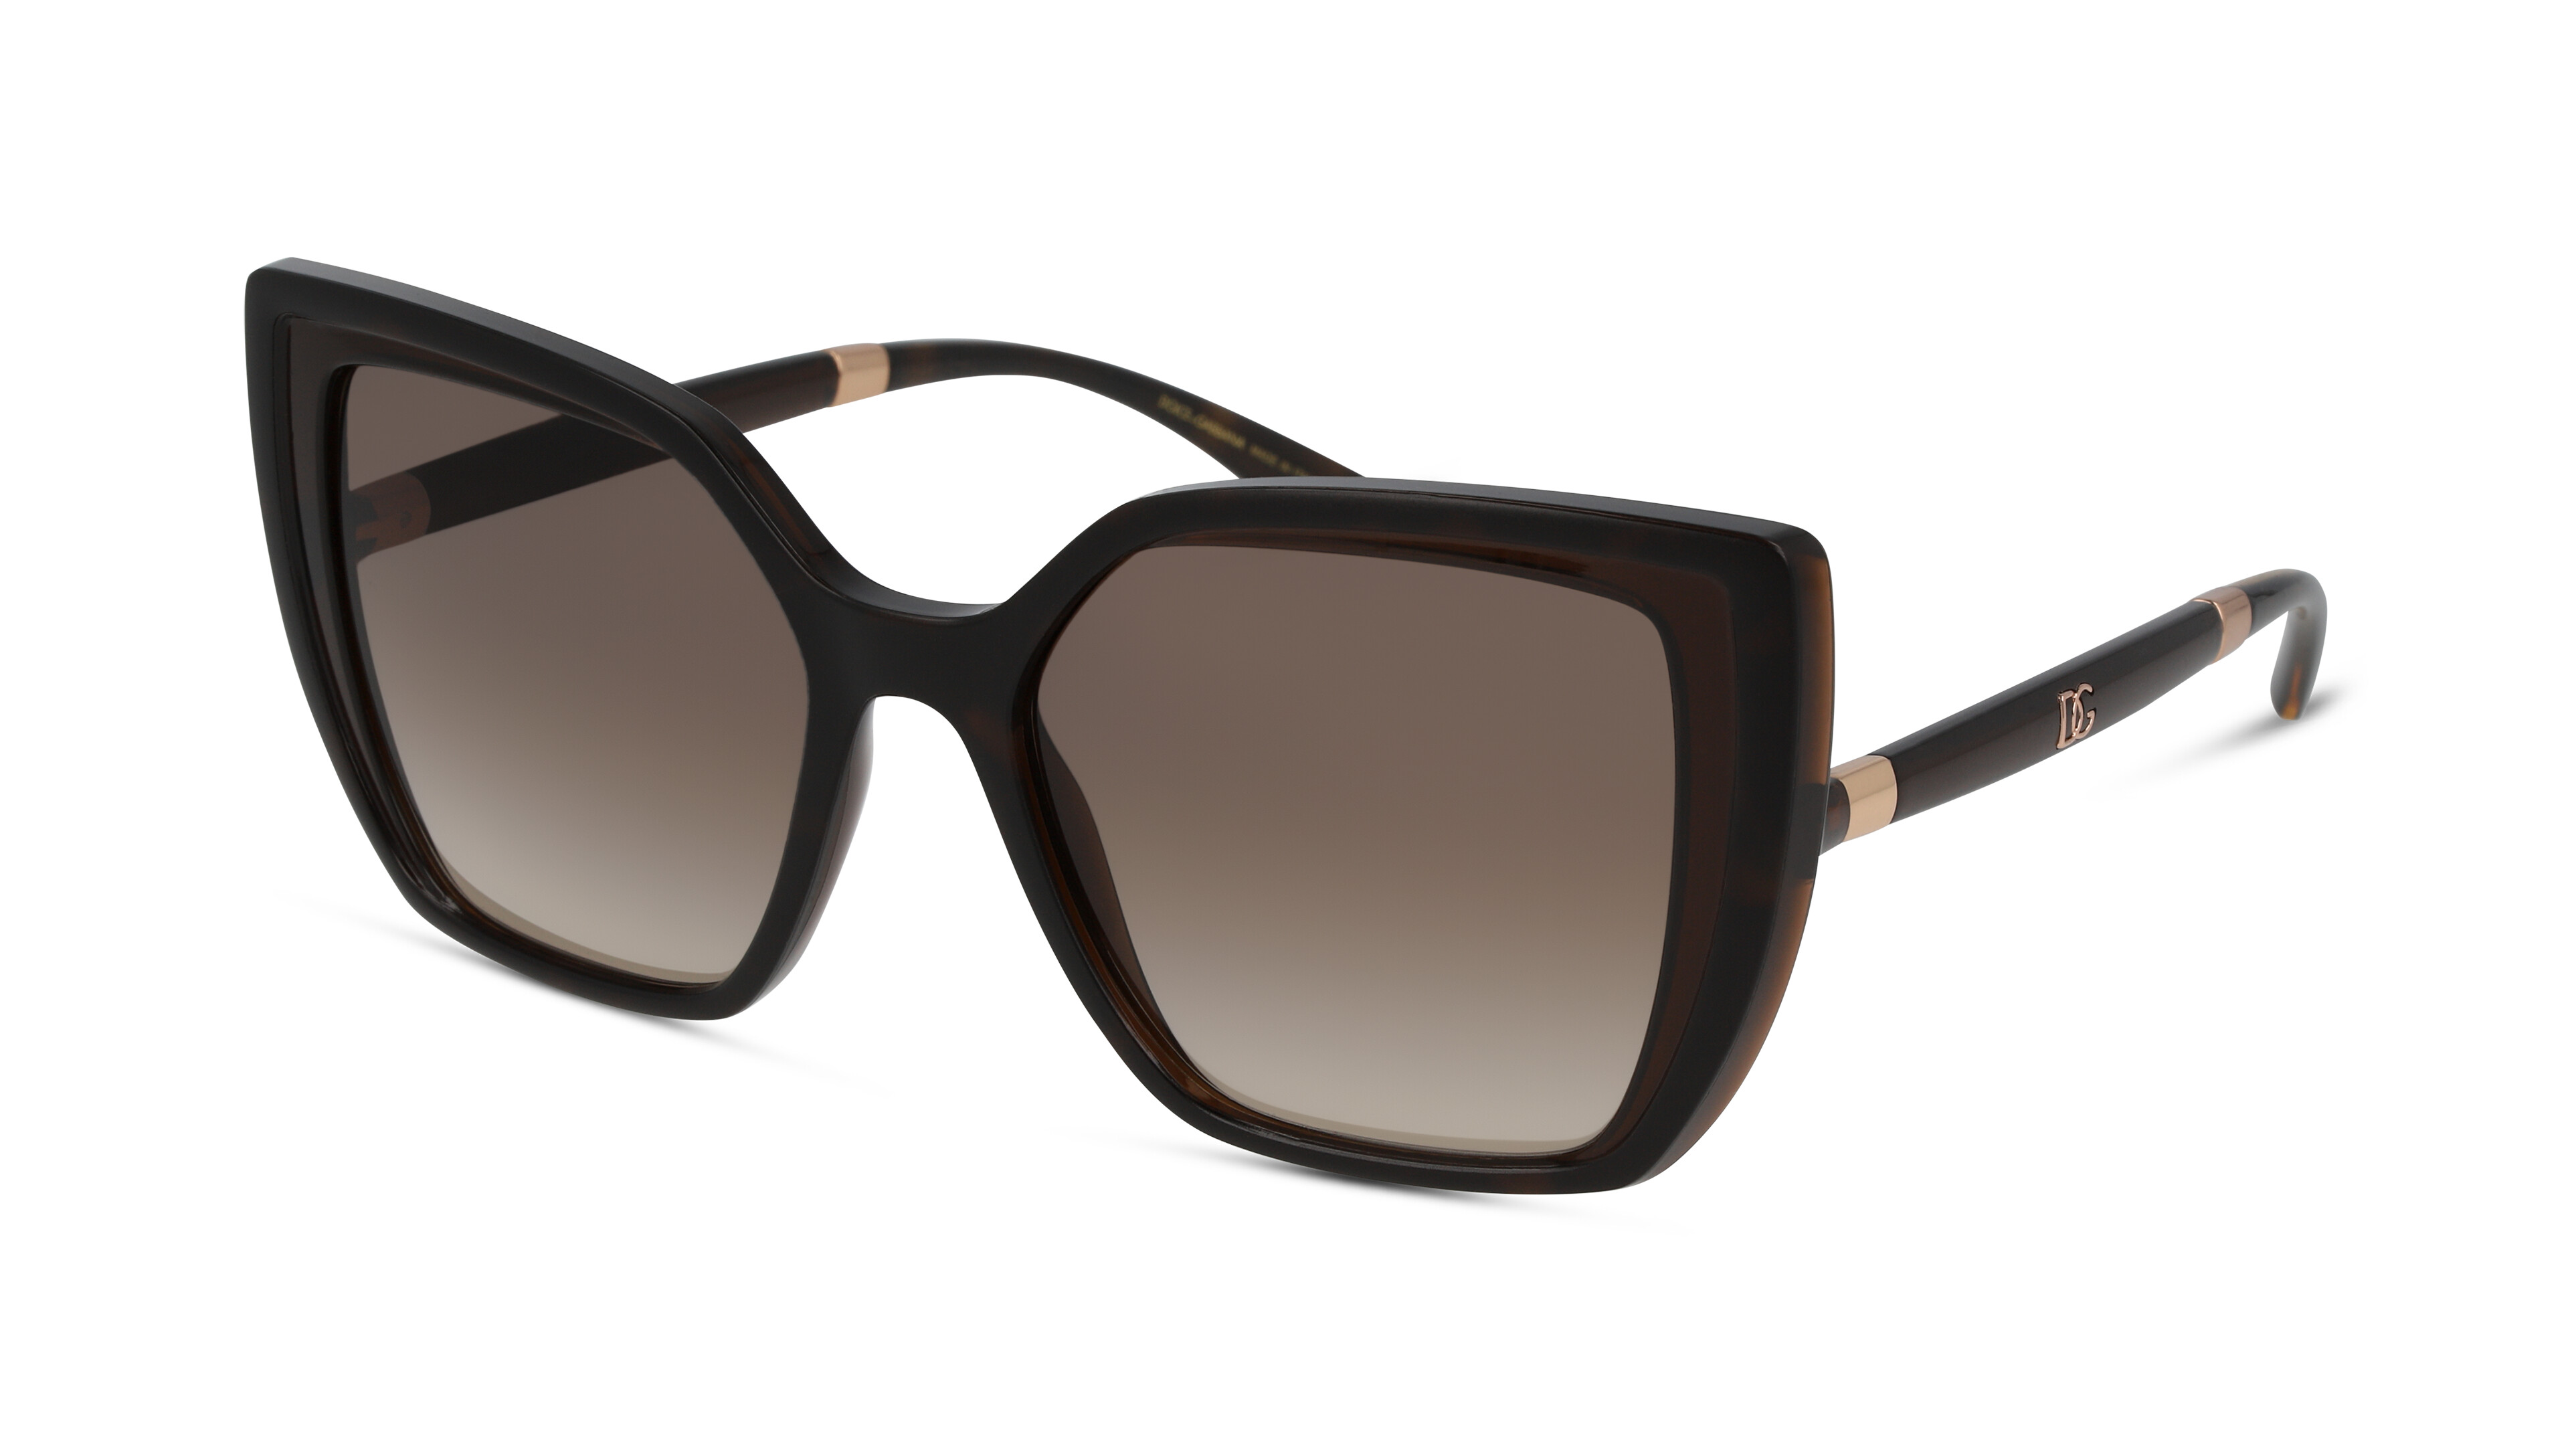 [products.image.angle_left01] Dolce&Gabbana 0DG6138 318513 Sonnenbrille